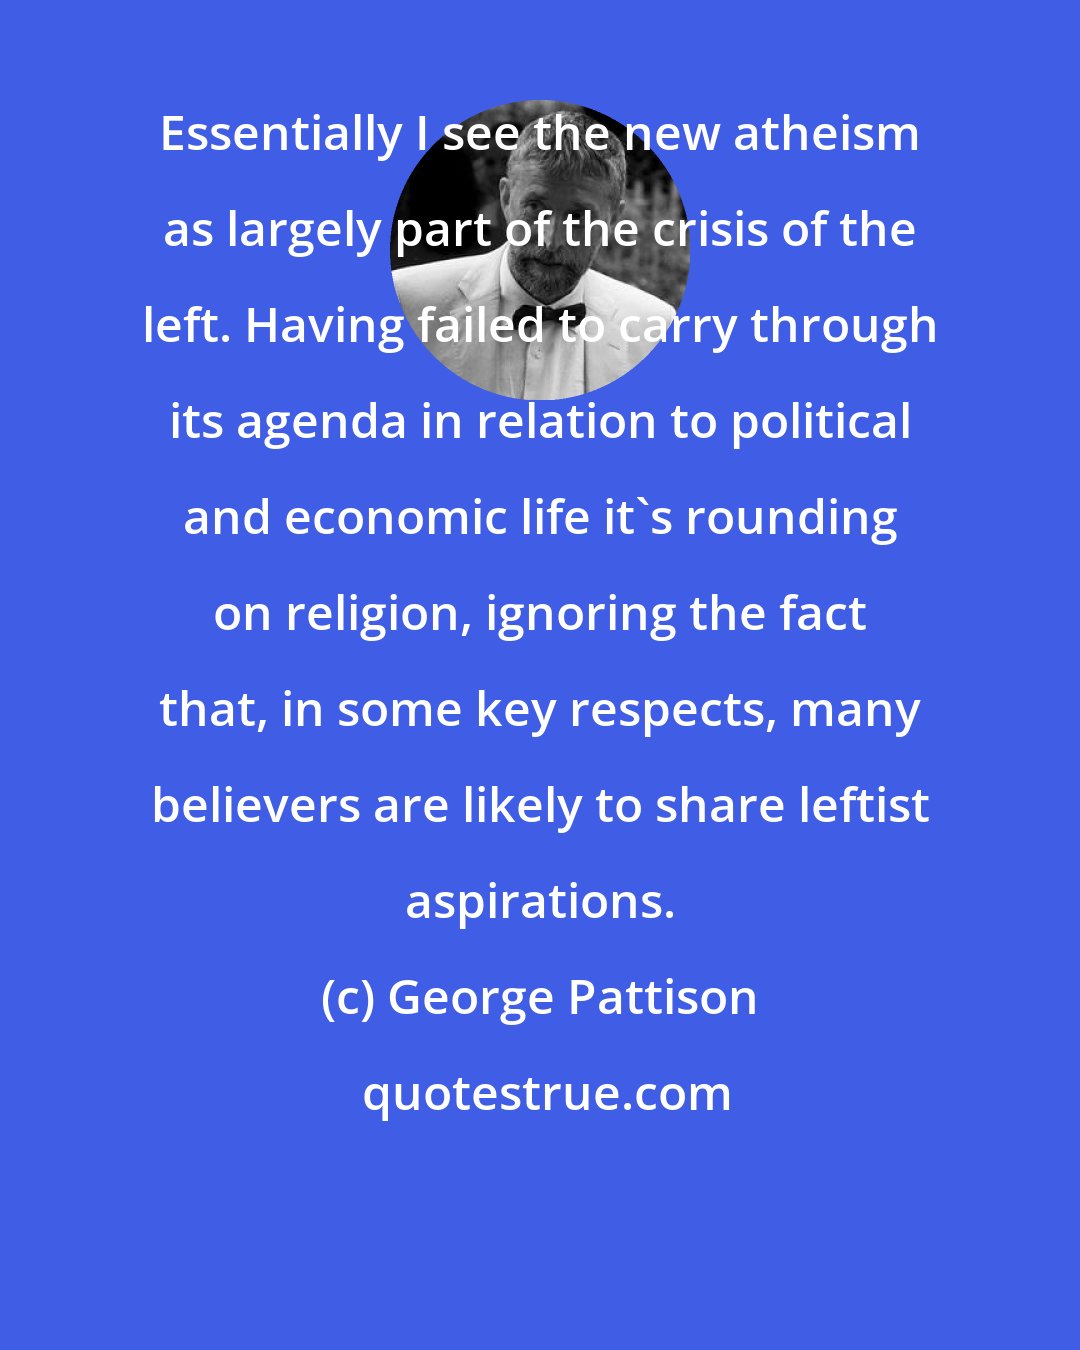 George Pattison: Essentially I see the new atheism as largely part of the crisis of the left. Having failed to carry through its agenda in relation to political and economic life it's rounding on religion, ignoring the fact that, in some key respects, many believers are likely to share leftist aspirations.